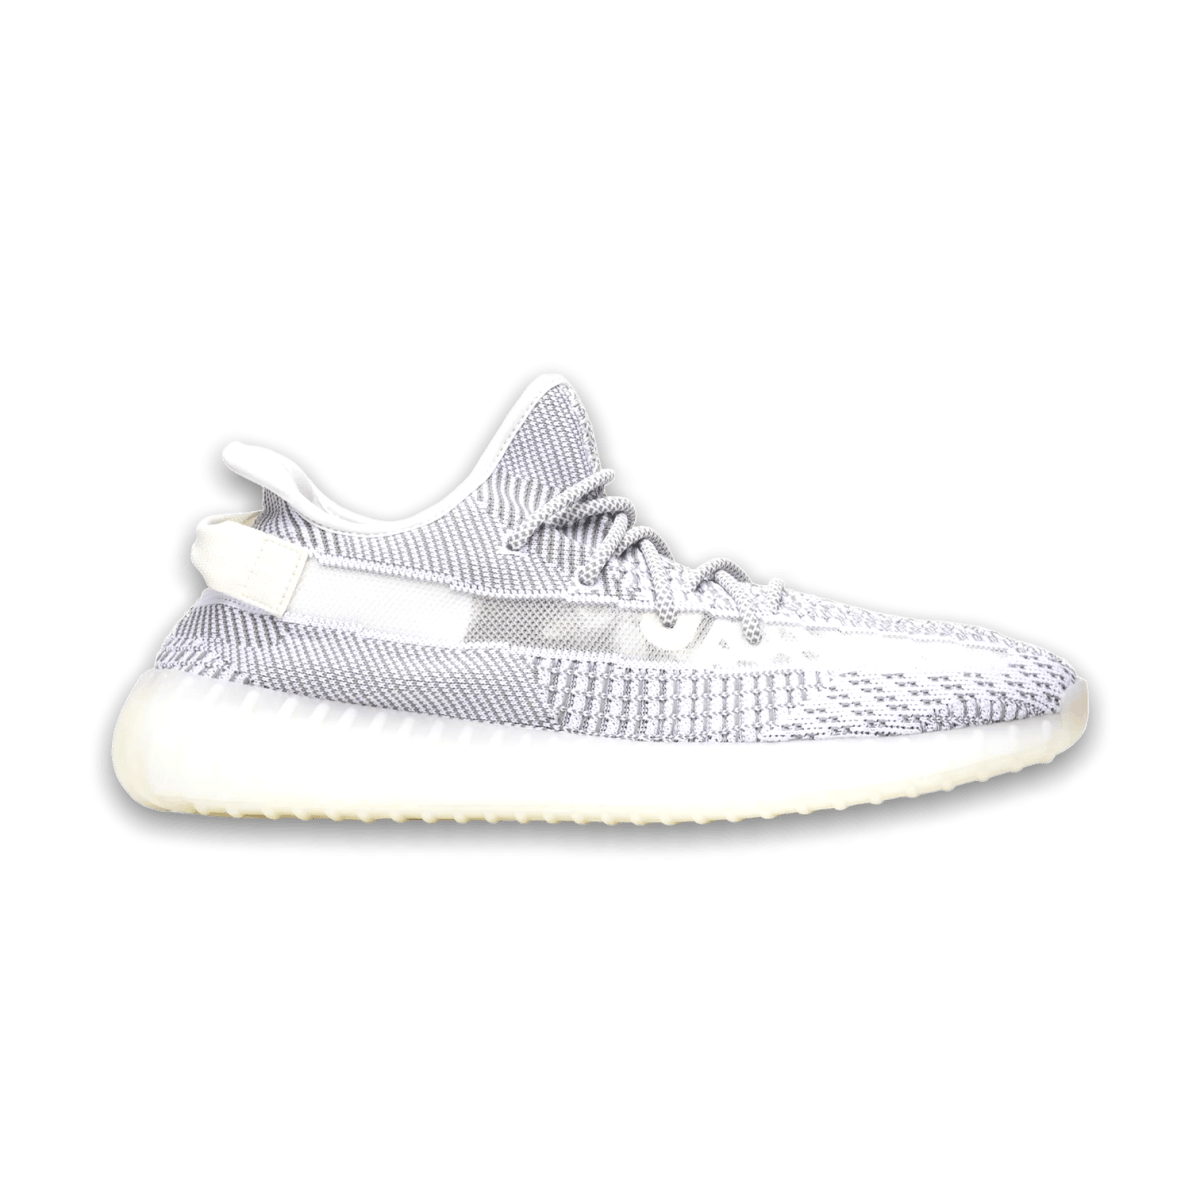 Yeezy Boost 350 V2 'Static Non-Reflective' - Low Sneaker - Yeezy - Jawns on Fire - sneakers